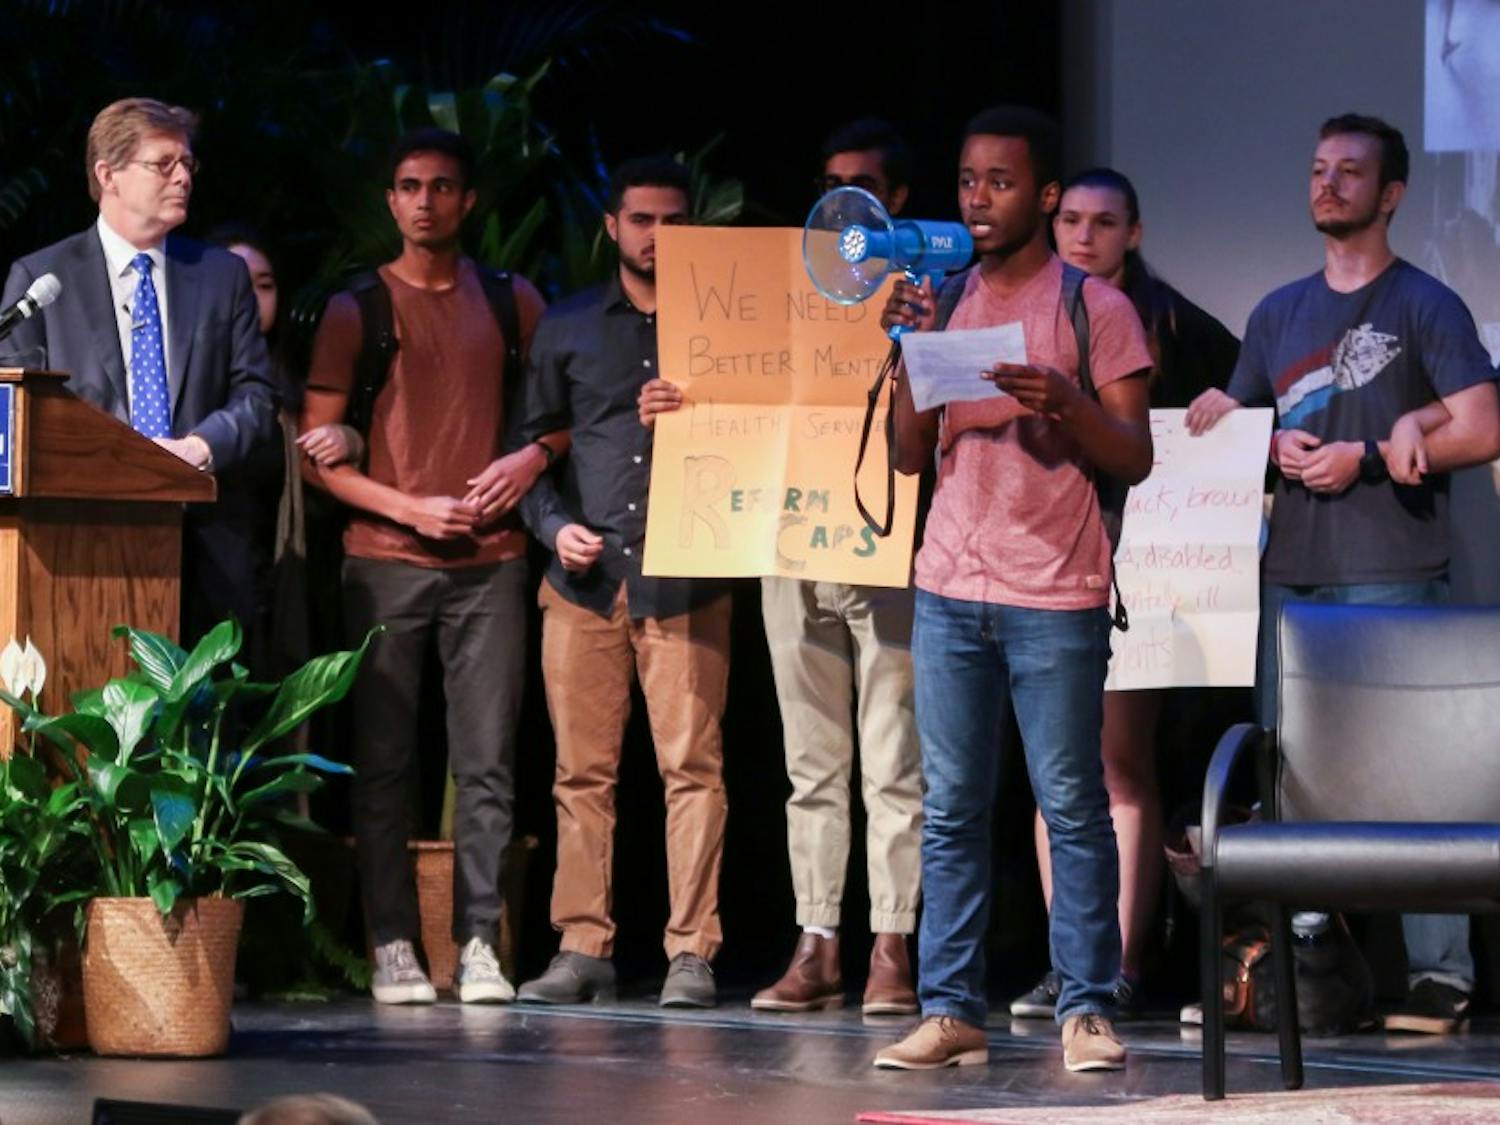 Students protest during alumni event